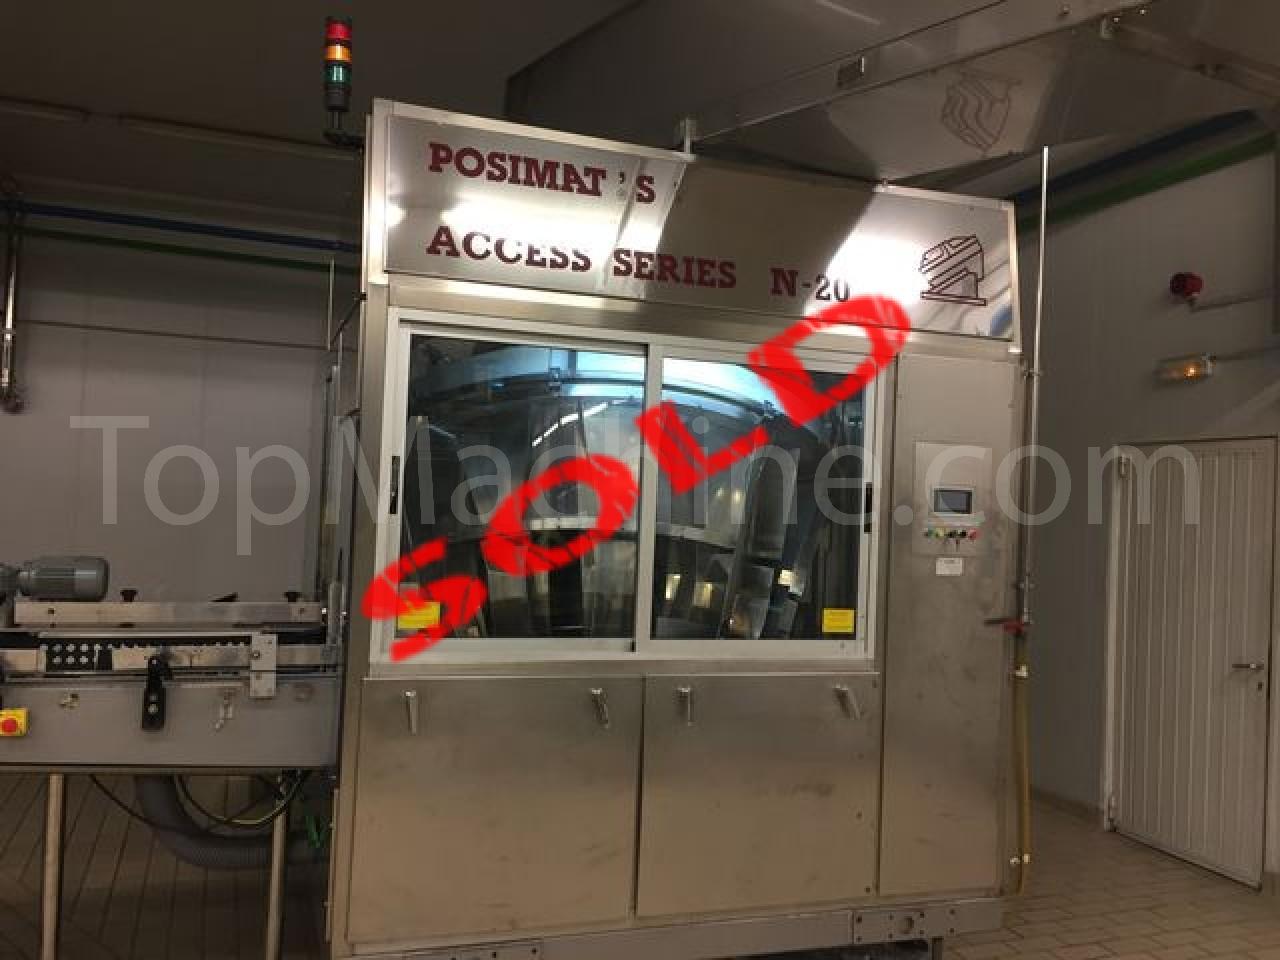 Used Posimat Access Series N-20 Beverages & Liquids Miscellaneous